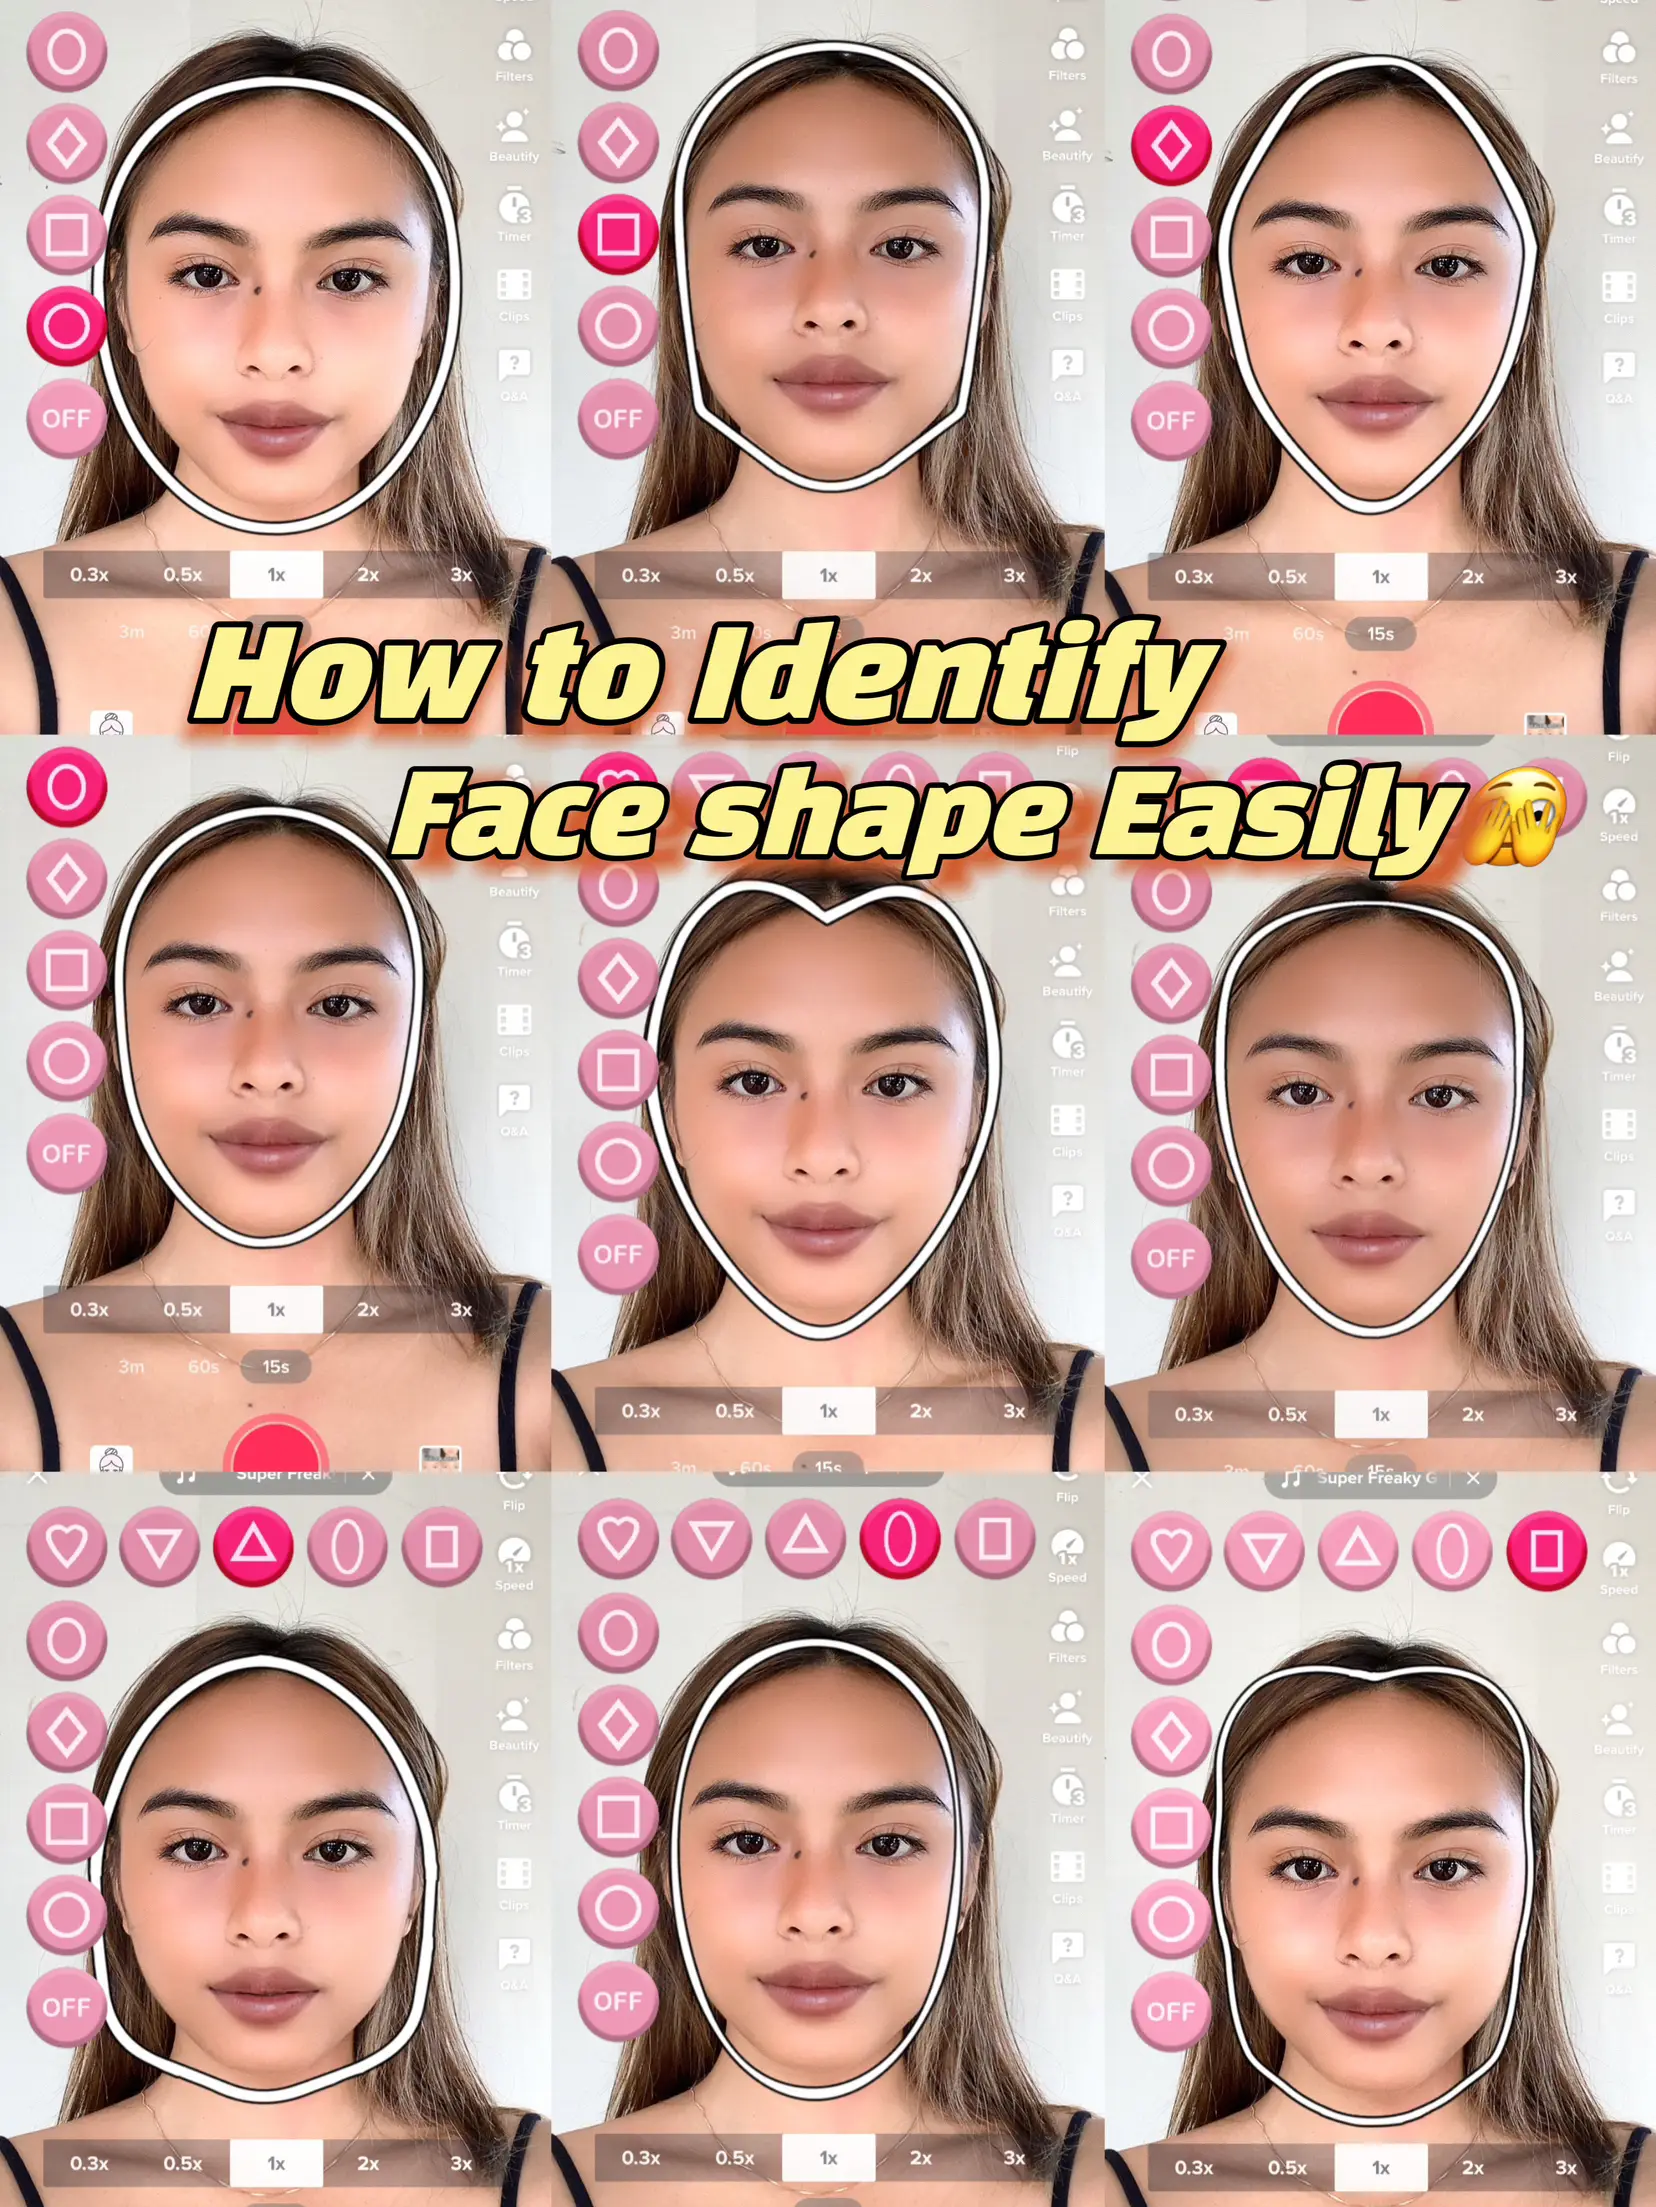 HOW TO IDENTIFY FACE SHAPE EASILY's images(0)